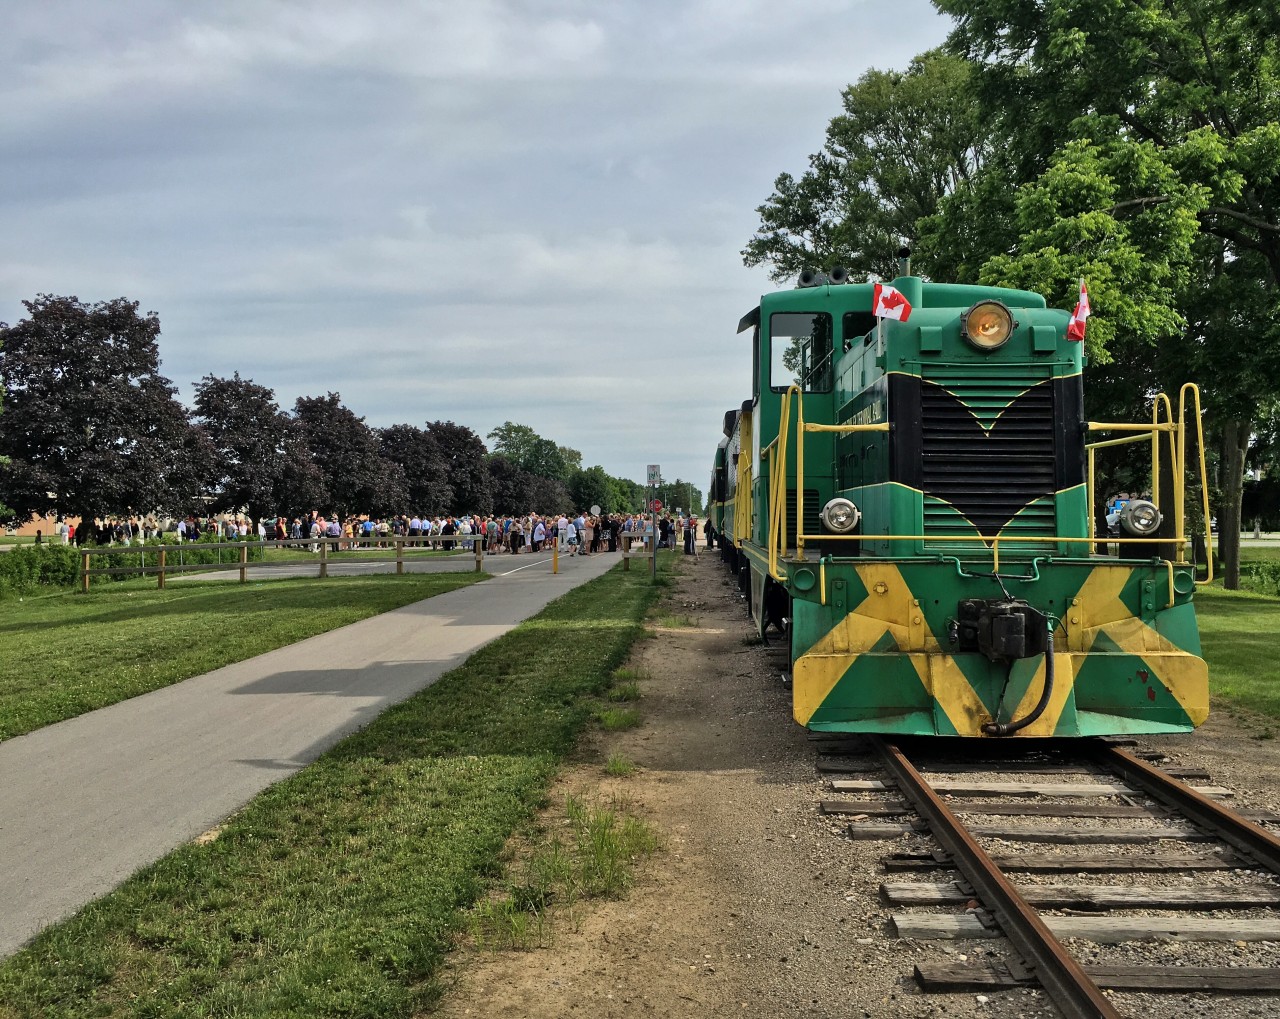 The annual Southwold Grad Charter has arrived at Parkside, and the graduating class is disembarking to attend their graduation. Leading the train is PSTR L3, 44 tonner, formerly CN #1, built in 1947. The heavyweight coach, built 1937, and service car are both of CN heritage as well.